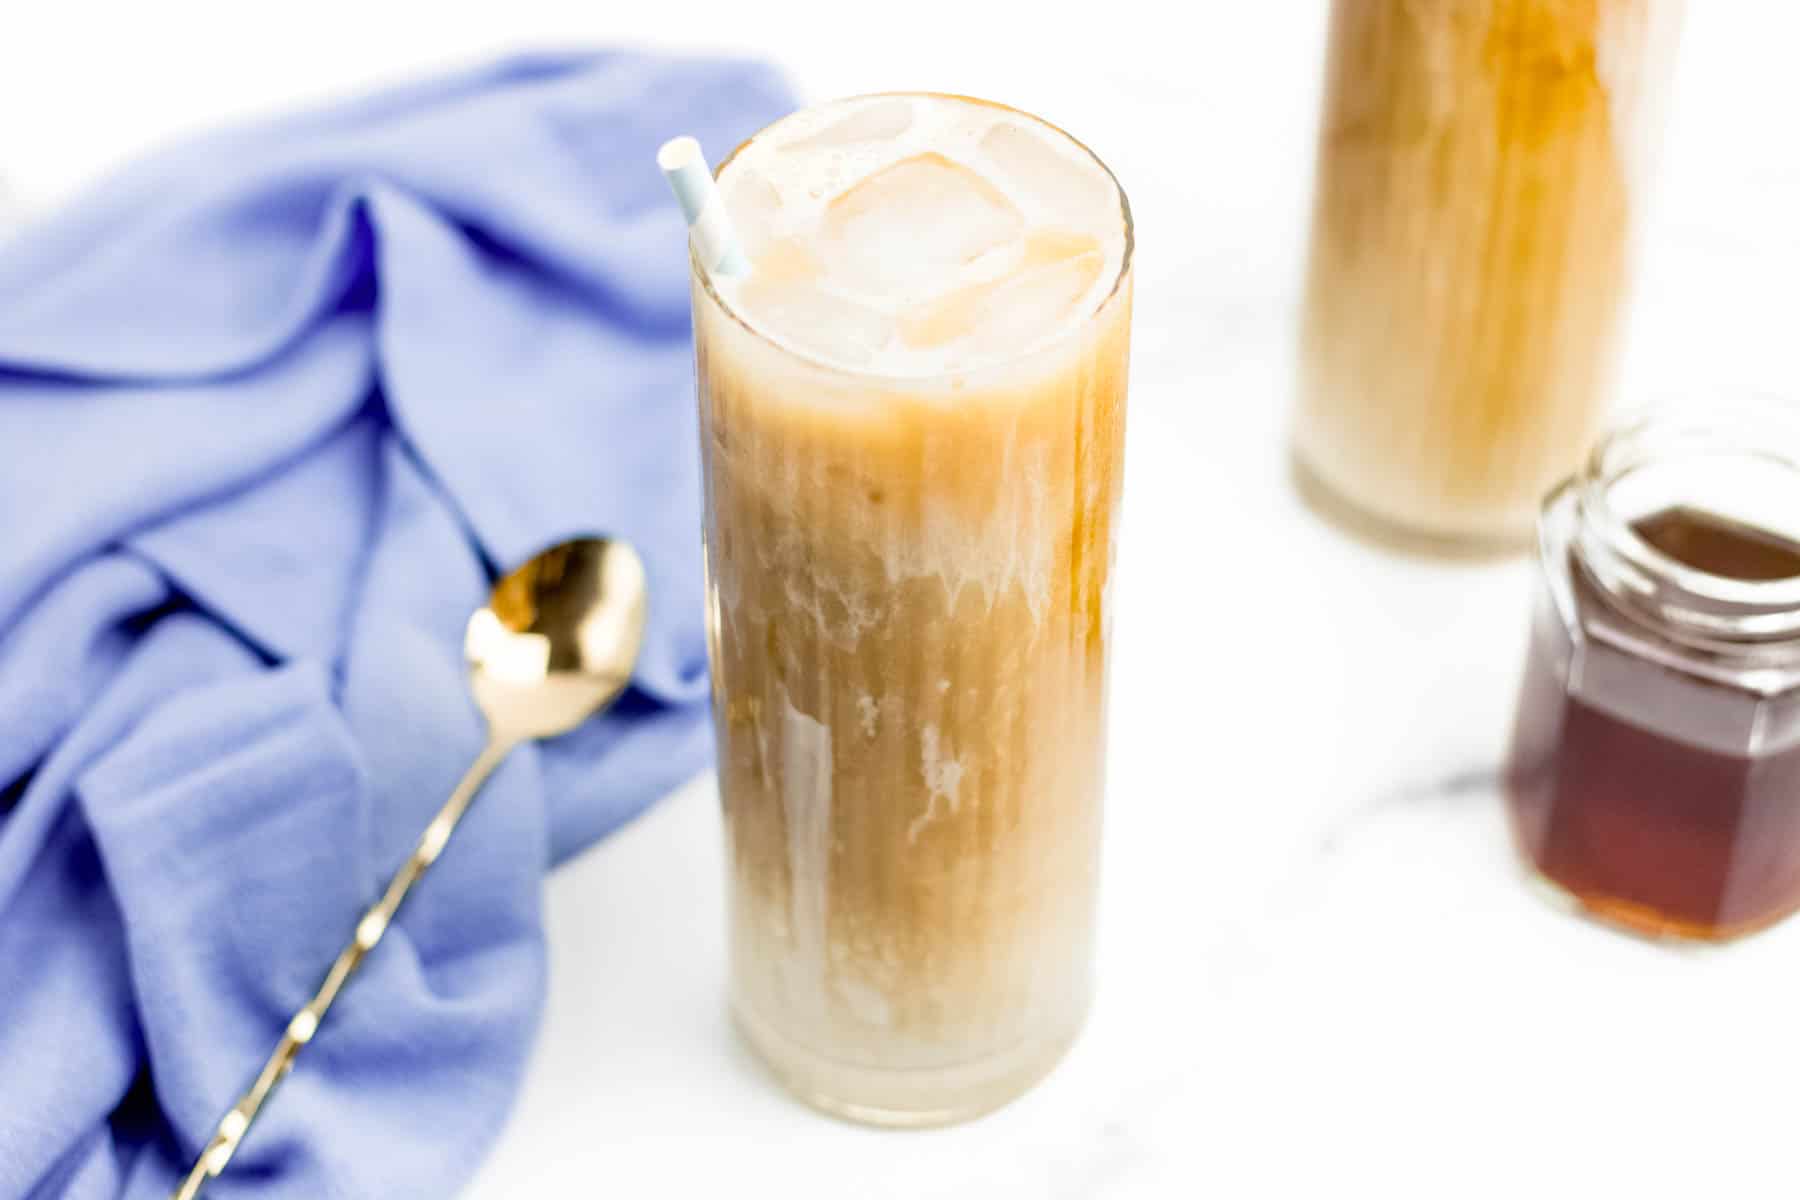 Two Iced Brown Sugar Oat Milk Shaken Espresso coffee drinks with a gold spoon and blue towel and a jar of brown sugar syrup.